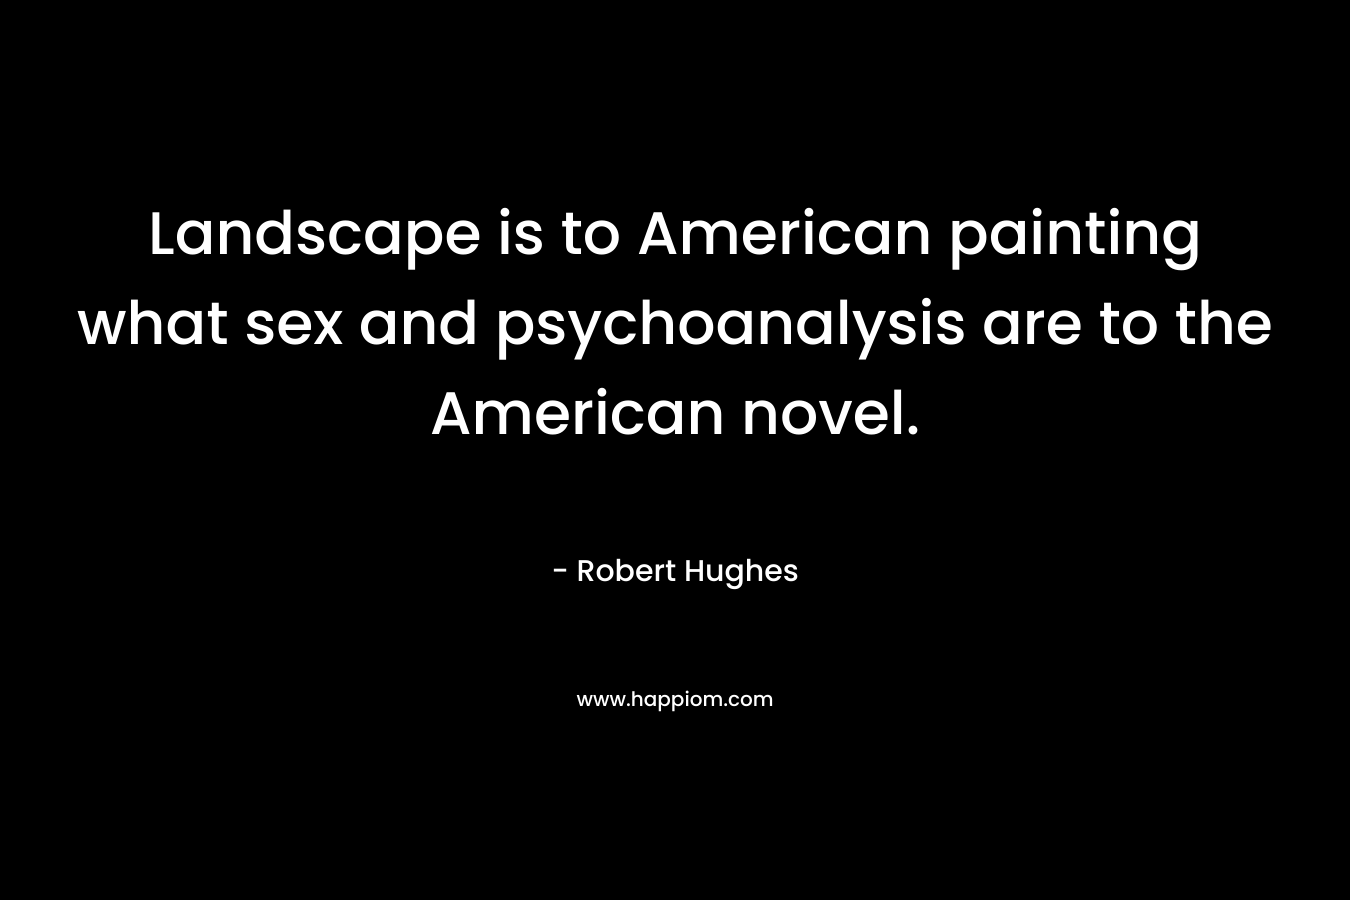 Landscape is to American painting what sex and psychoanalysis are to the American novel. – Robert Hughes